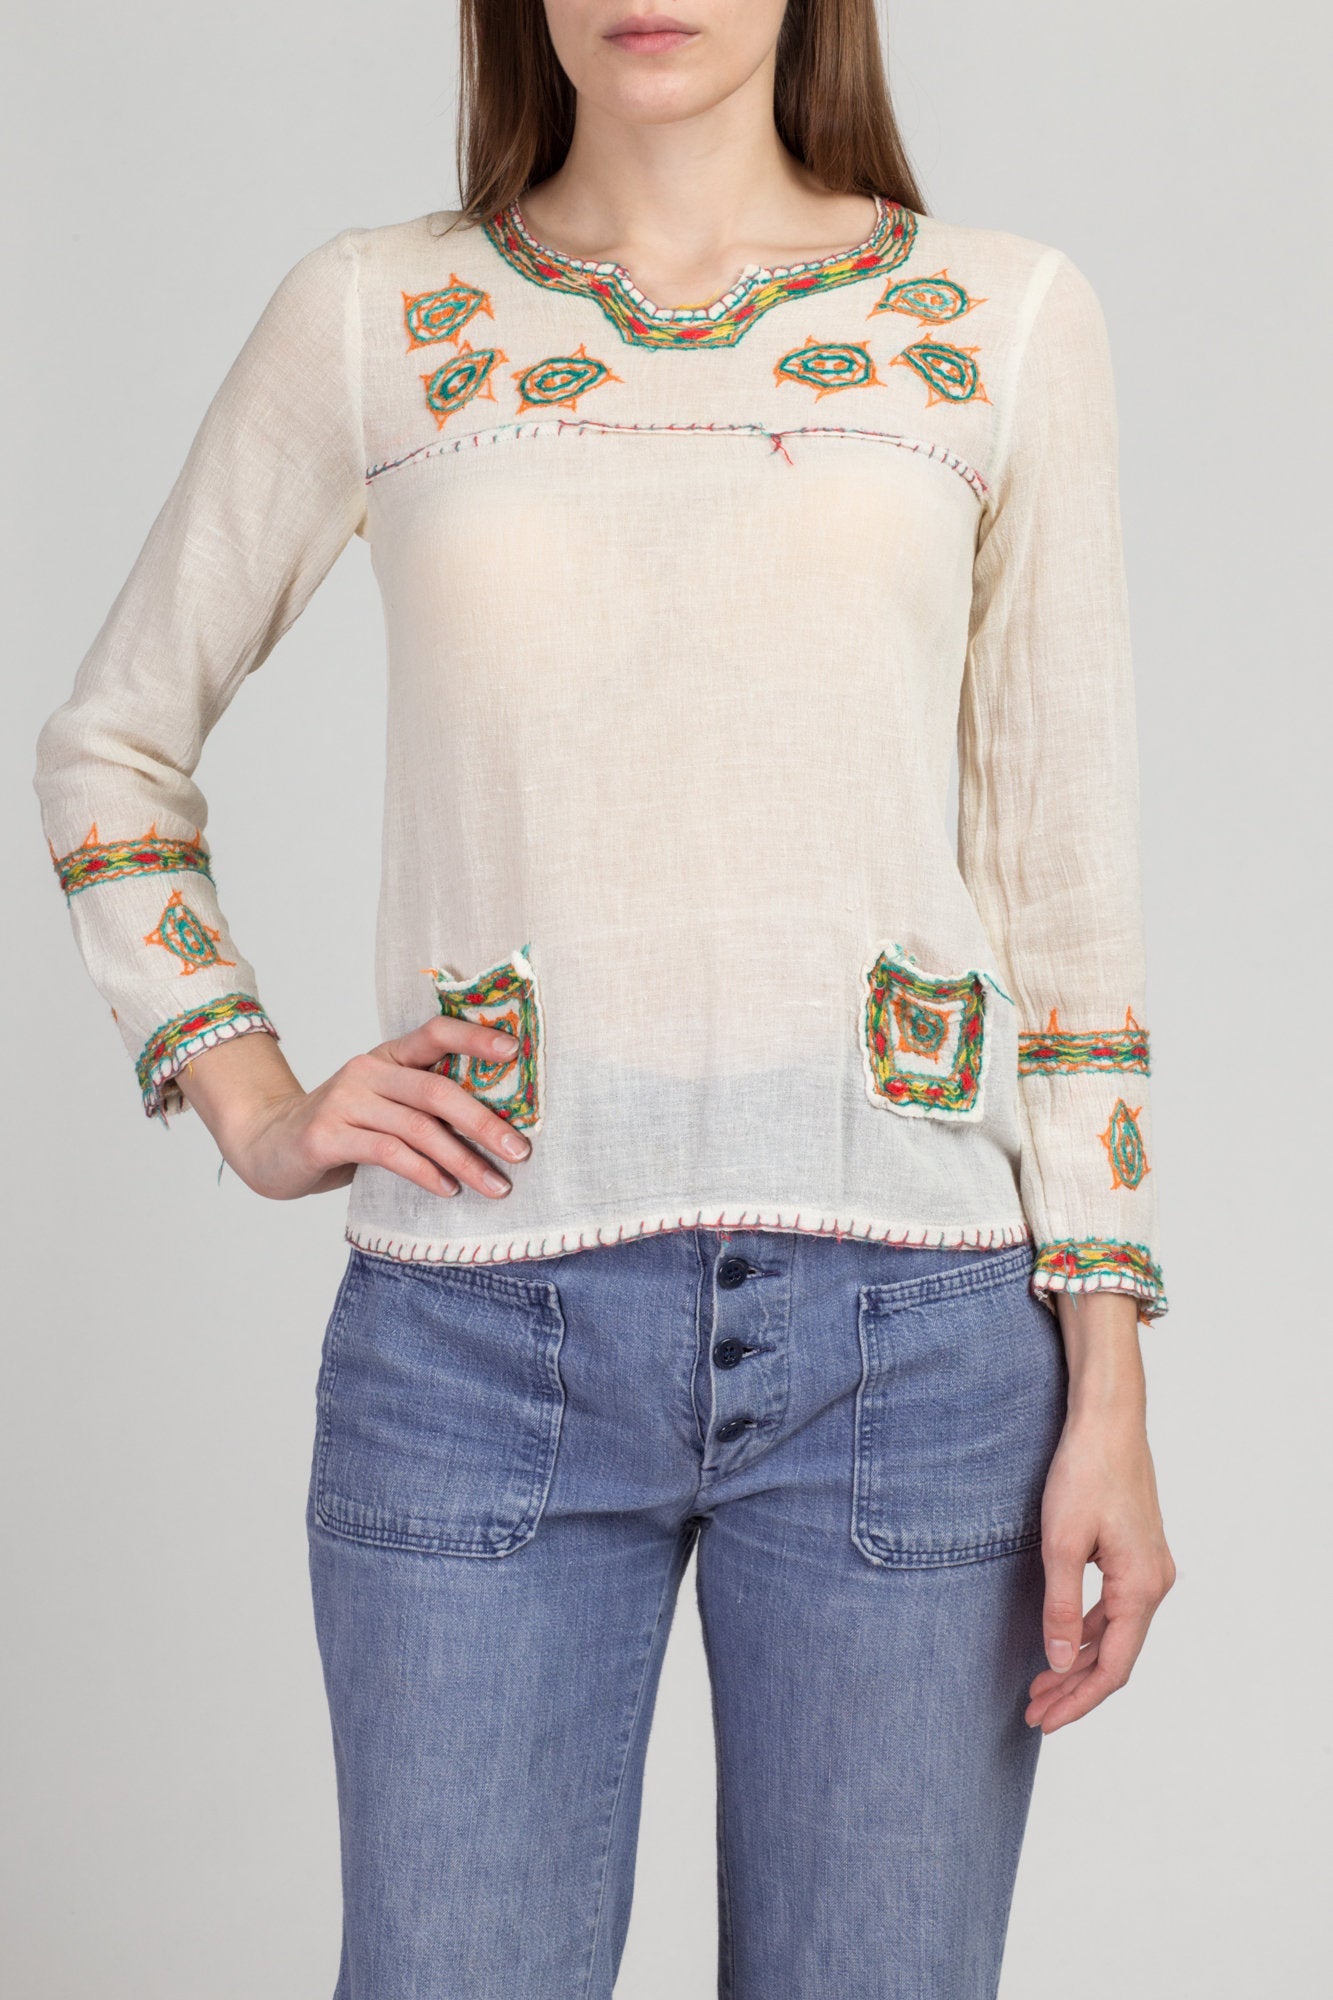 70s Floral Embroidered Peasant Shirt - Small | Vintage Boho Sheer Gauzy Cotton Hippie Blouse